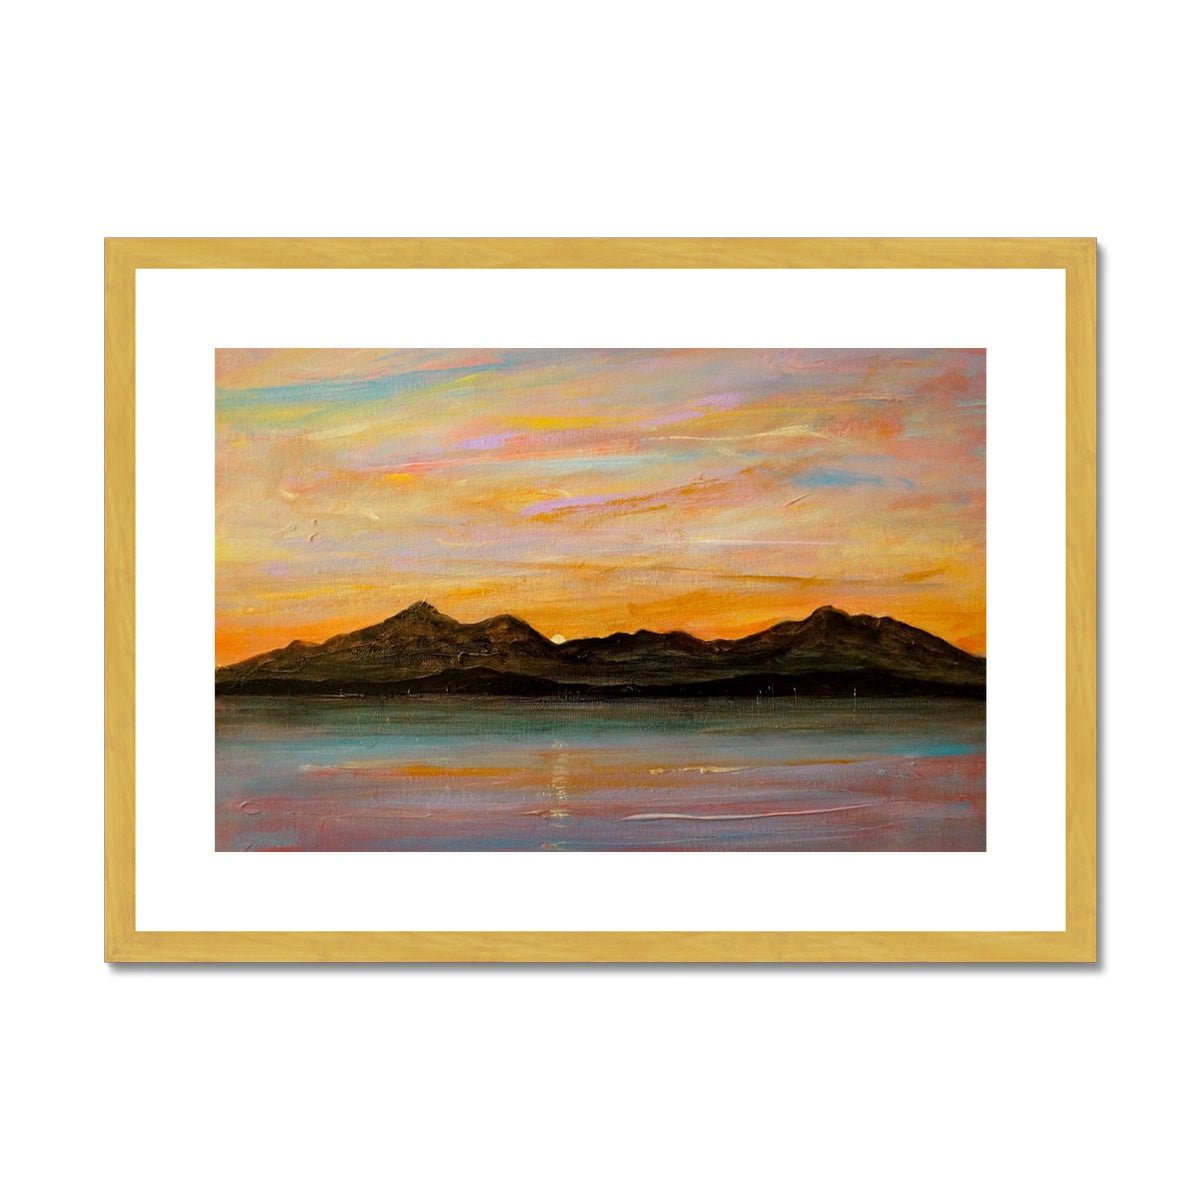 The Sleeping Warrior Arran Painting | Antique Framed & Mounted Prints From Scotland-Antique Framed & Mounted Prints-Arran Art Gallery-A2 Landscape-Gold Frame-Paintings, Prints, Homeware, Art Gifts From Scotland By Scottish Artist Kevin Hunter